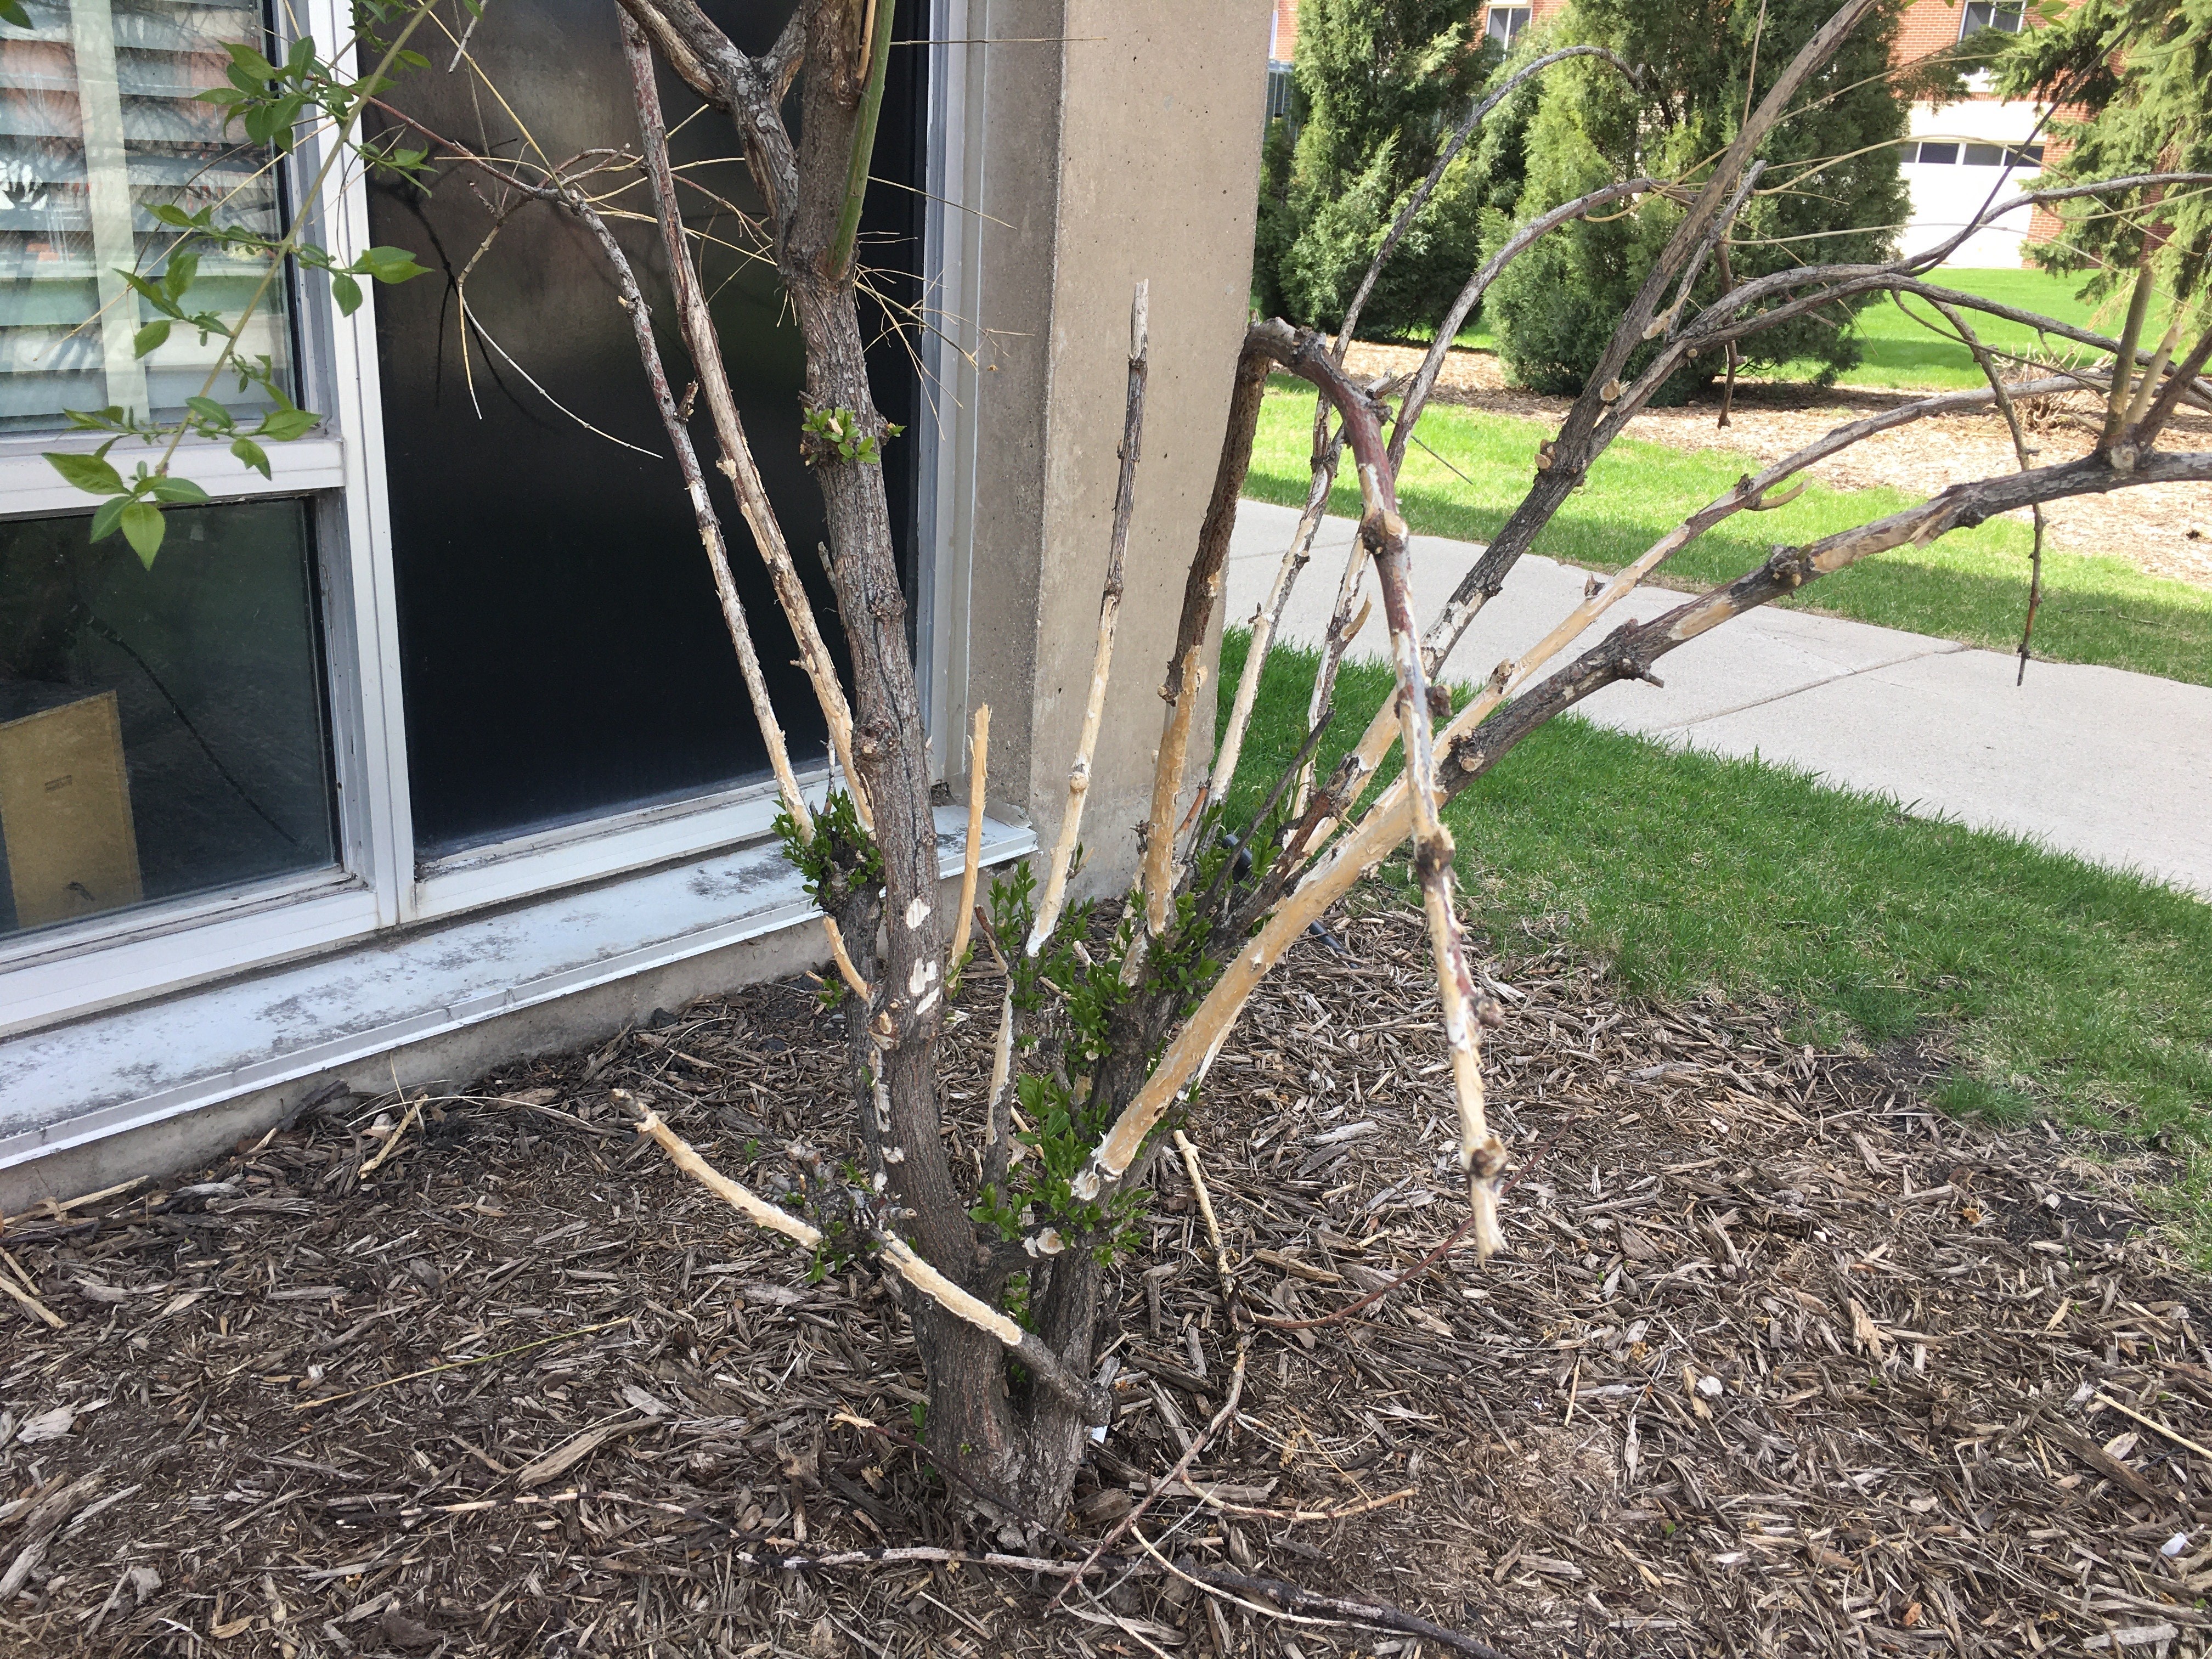 This euonymus shrub was nearly destroyed by cottontail rabbits in winter 2019-2020. Only one stem survived. (NDSU photo)